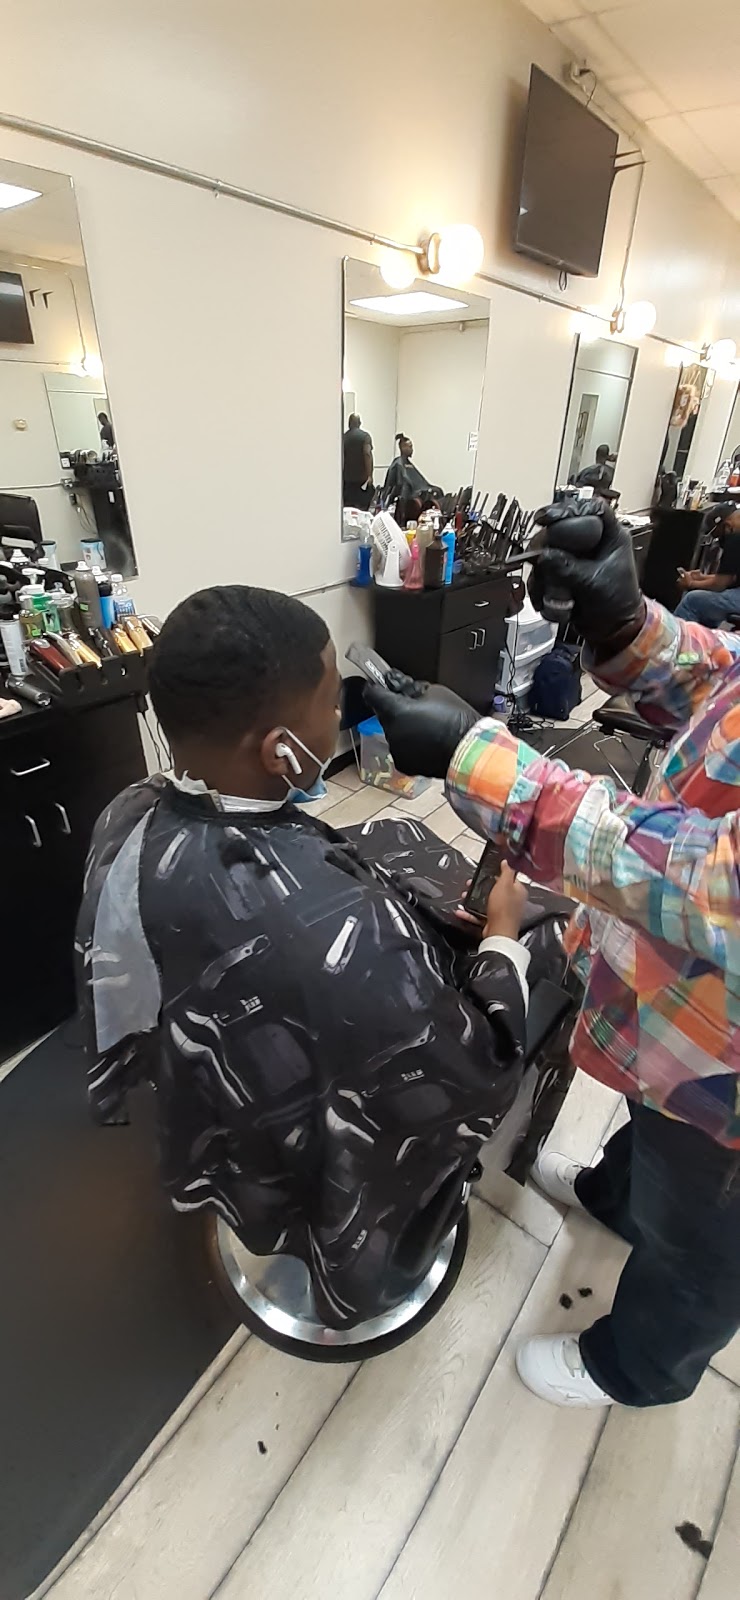 Klippers Barber Salon - hair care  | Photo 1 of 3 | Address: 9008 Overland Plaza, St. Louis, MO 63114, USA | Phone: (314) 801-8616